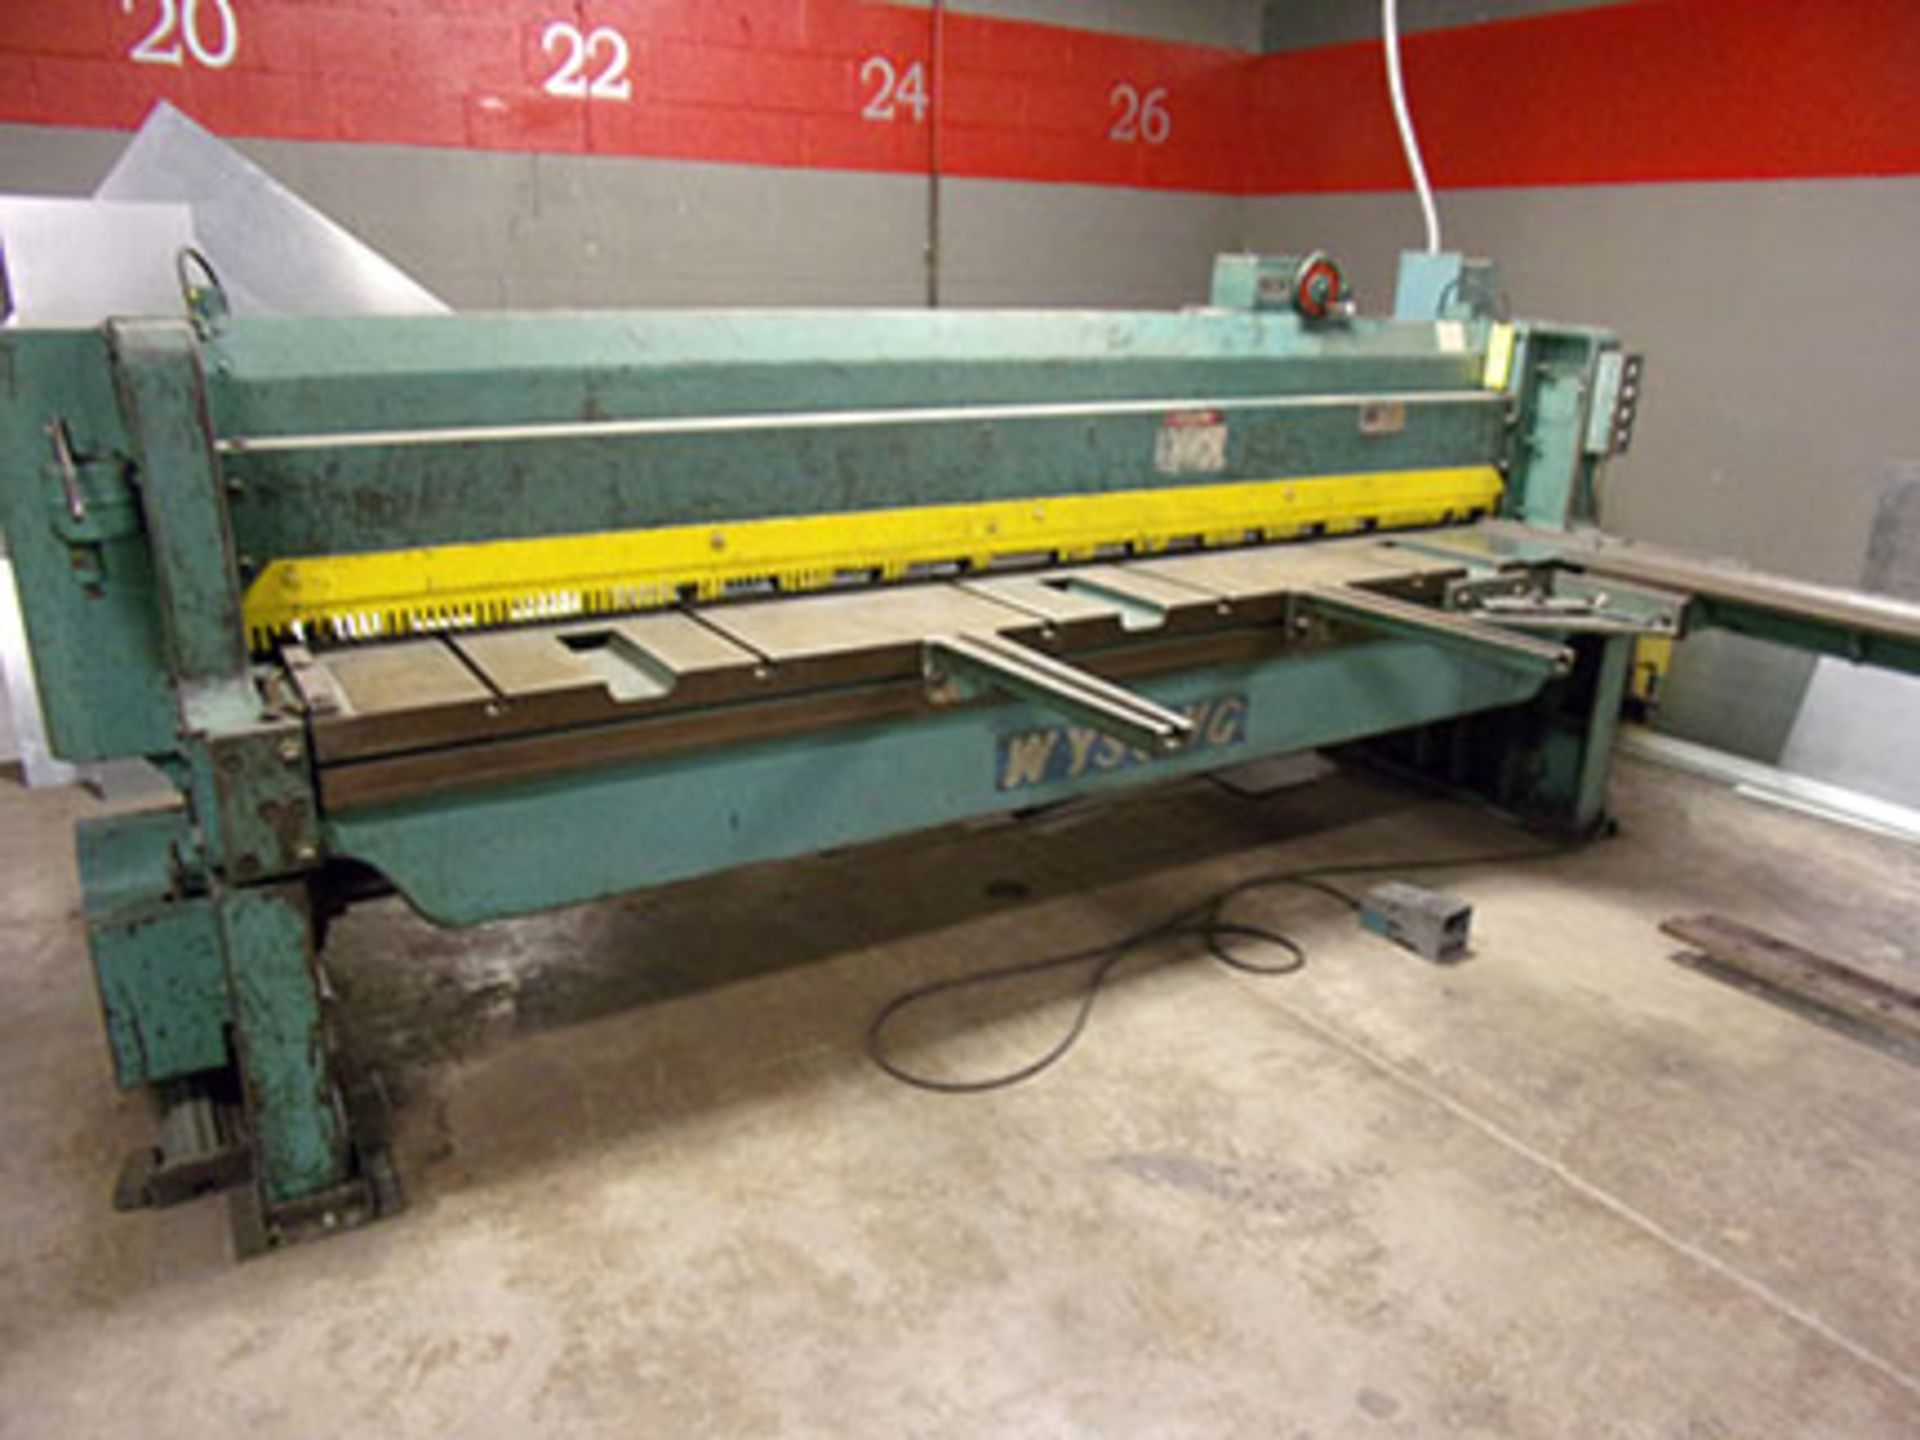 WYSONG 10' SHEAR WITH SQUARING ARM, BACK GAUGE; 7 1/2 HP MOTOR